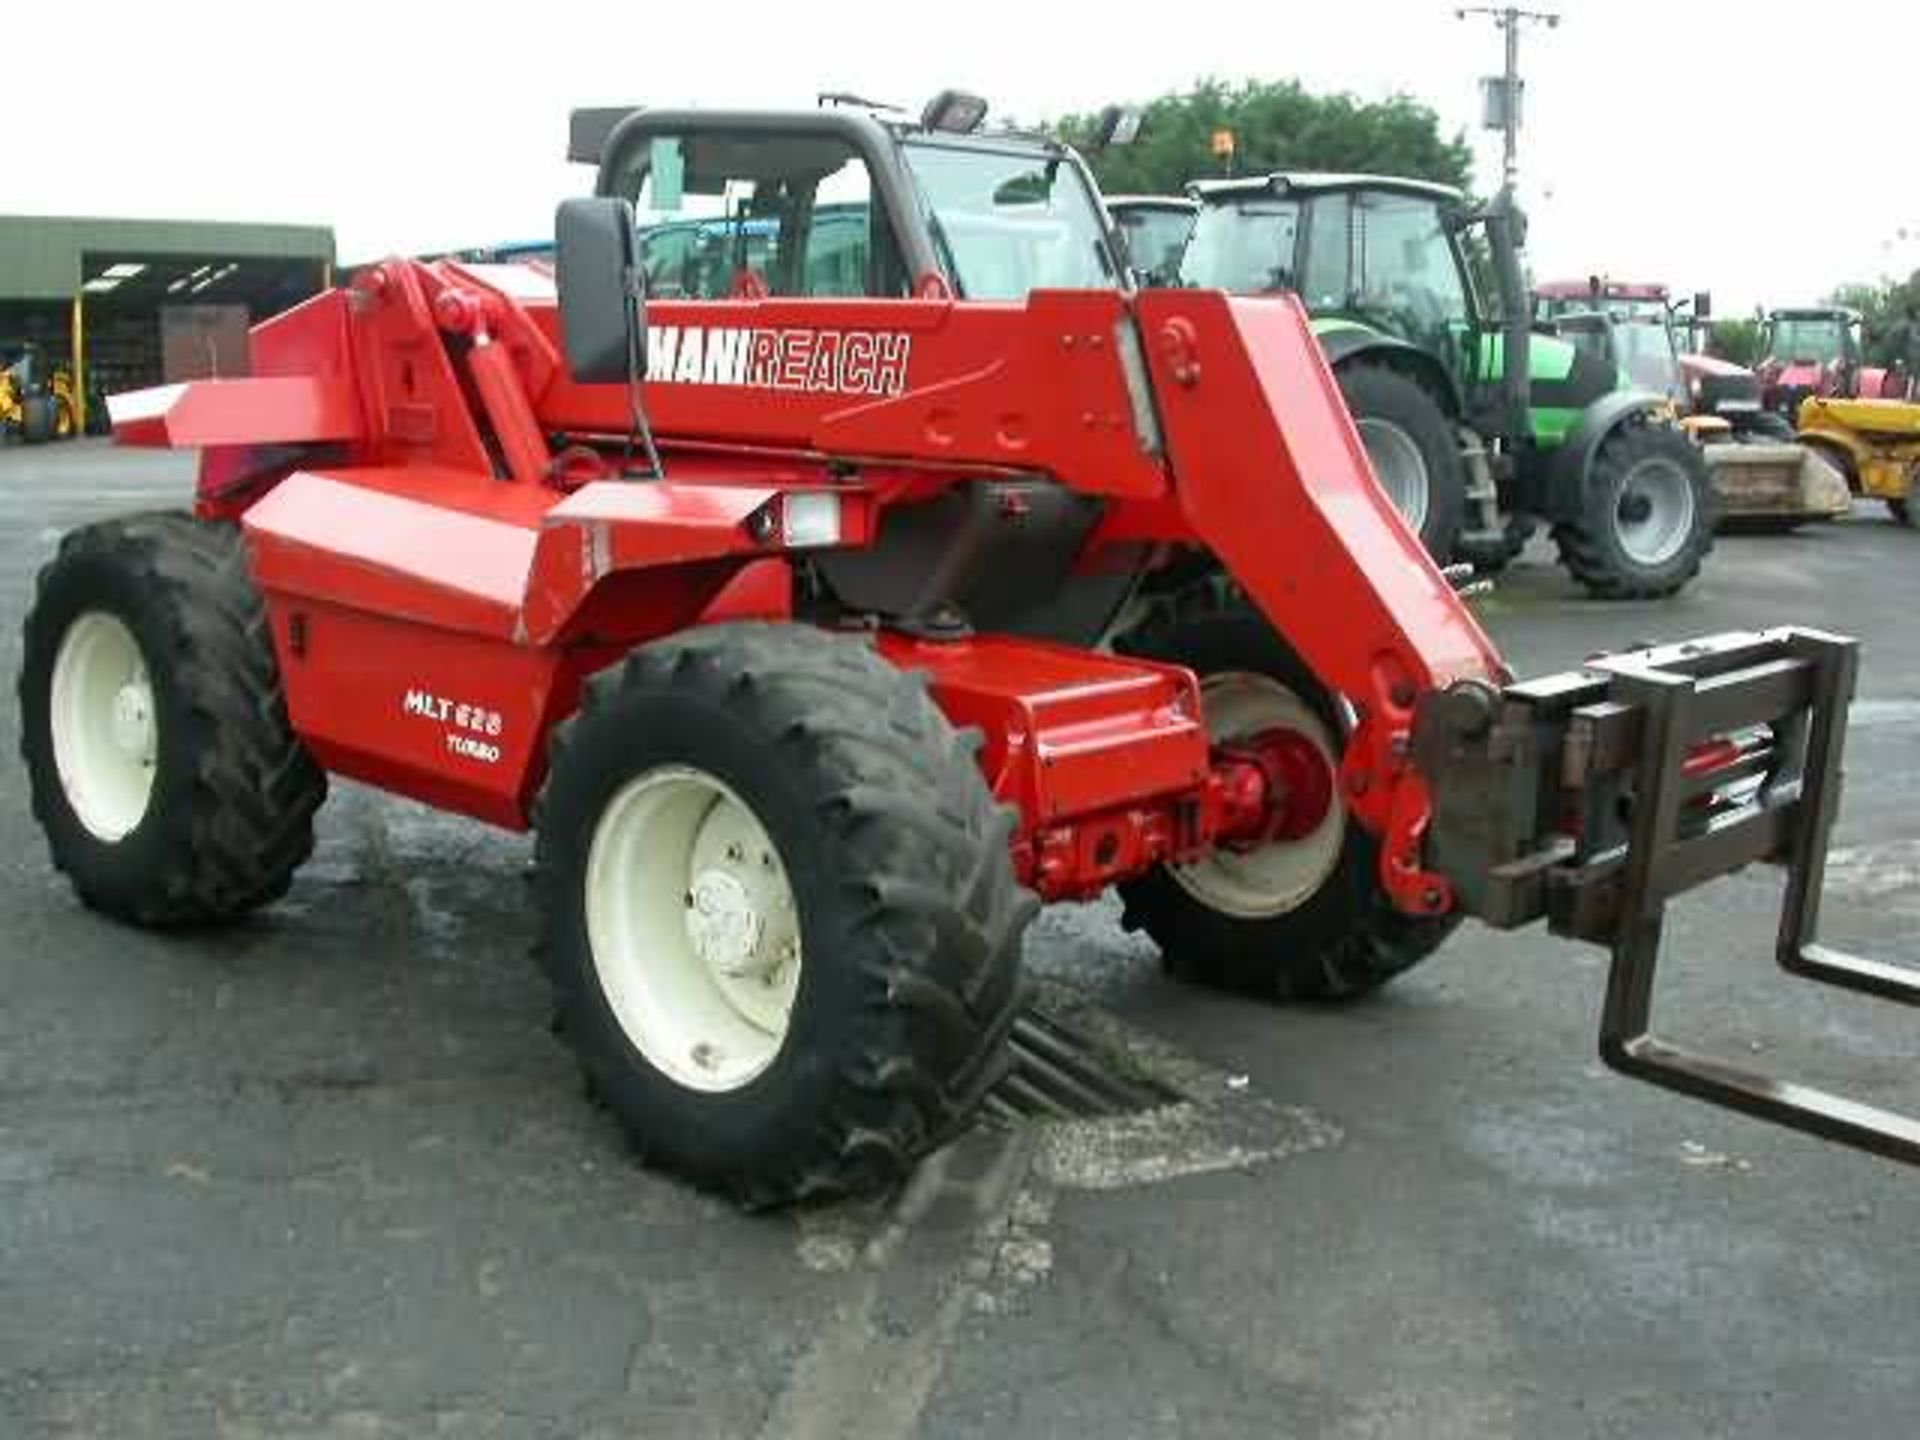 1998 Manitou 628 Turbo with Pick Up Hitch